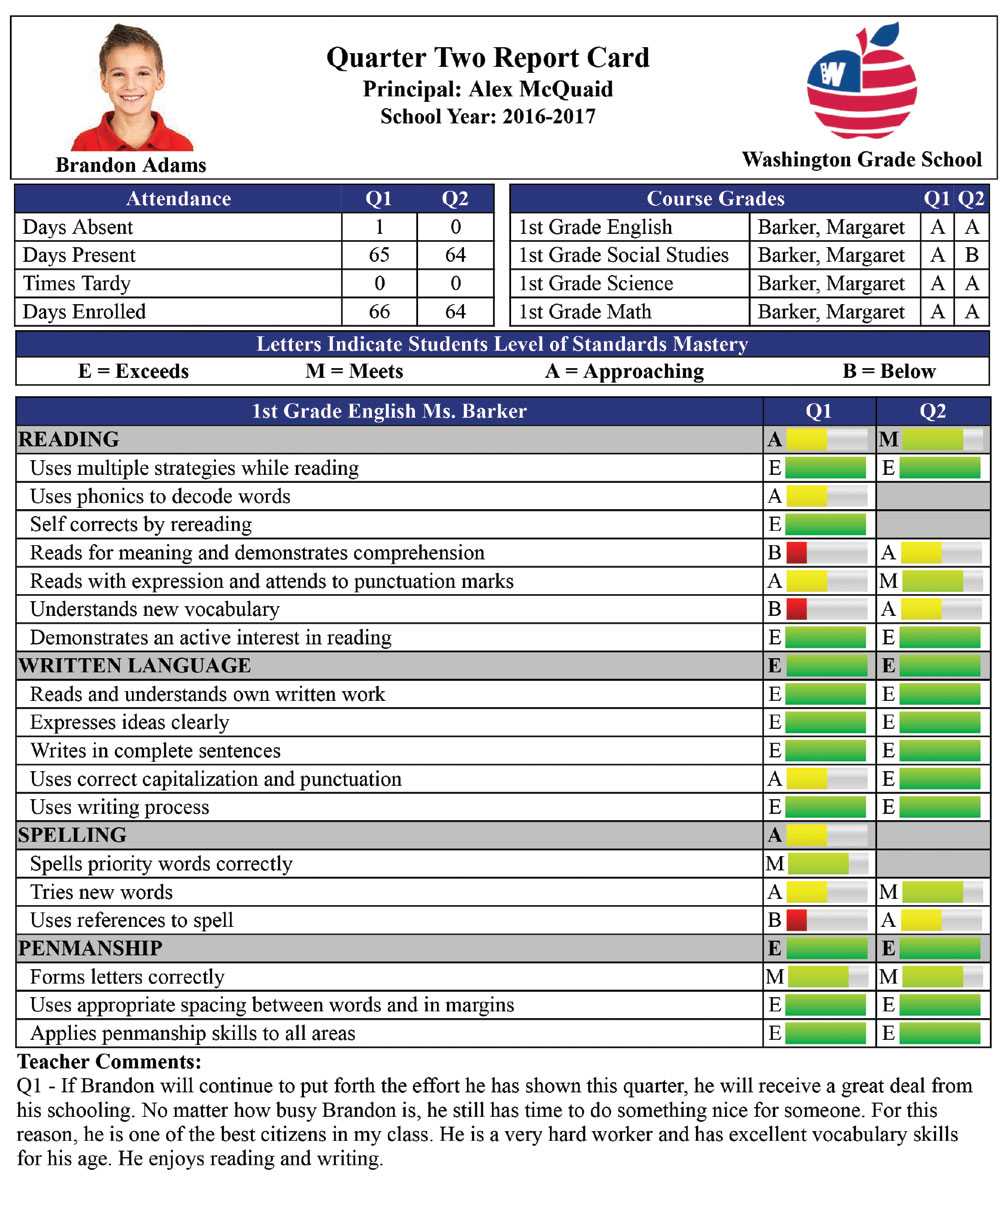 Report Card Creator Plugin For Powerschool Sis - From Mba Throughout Powerschool Reports Templates